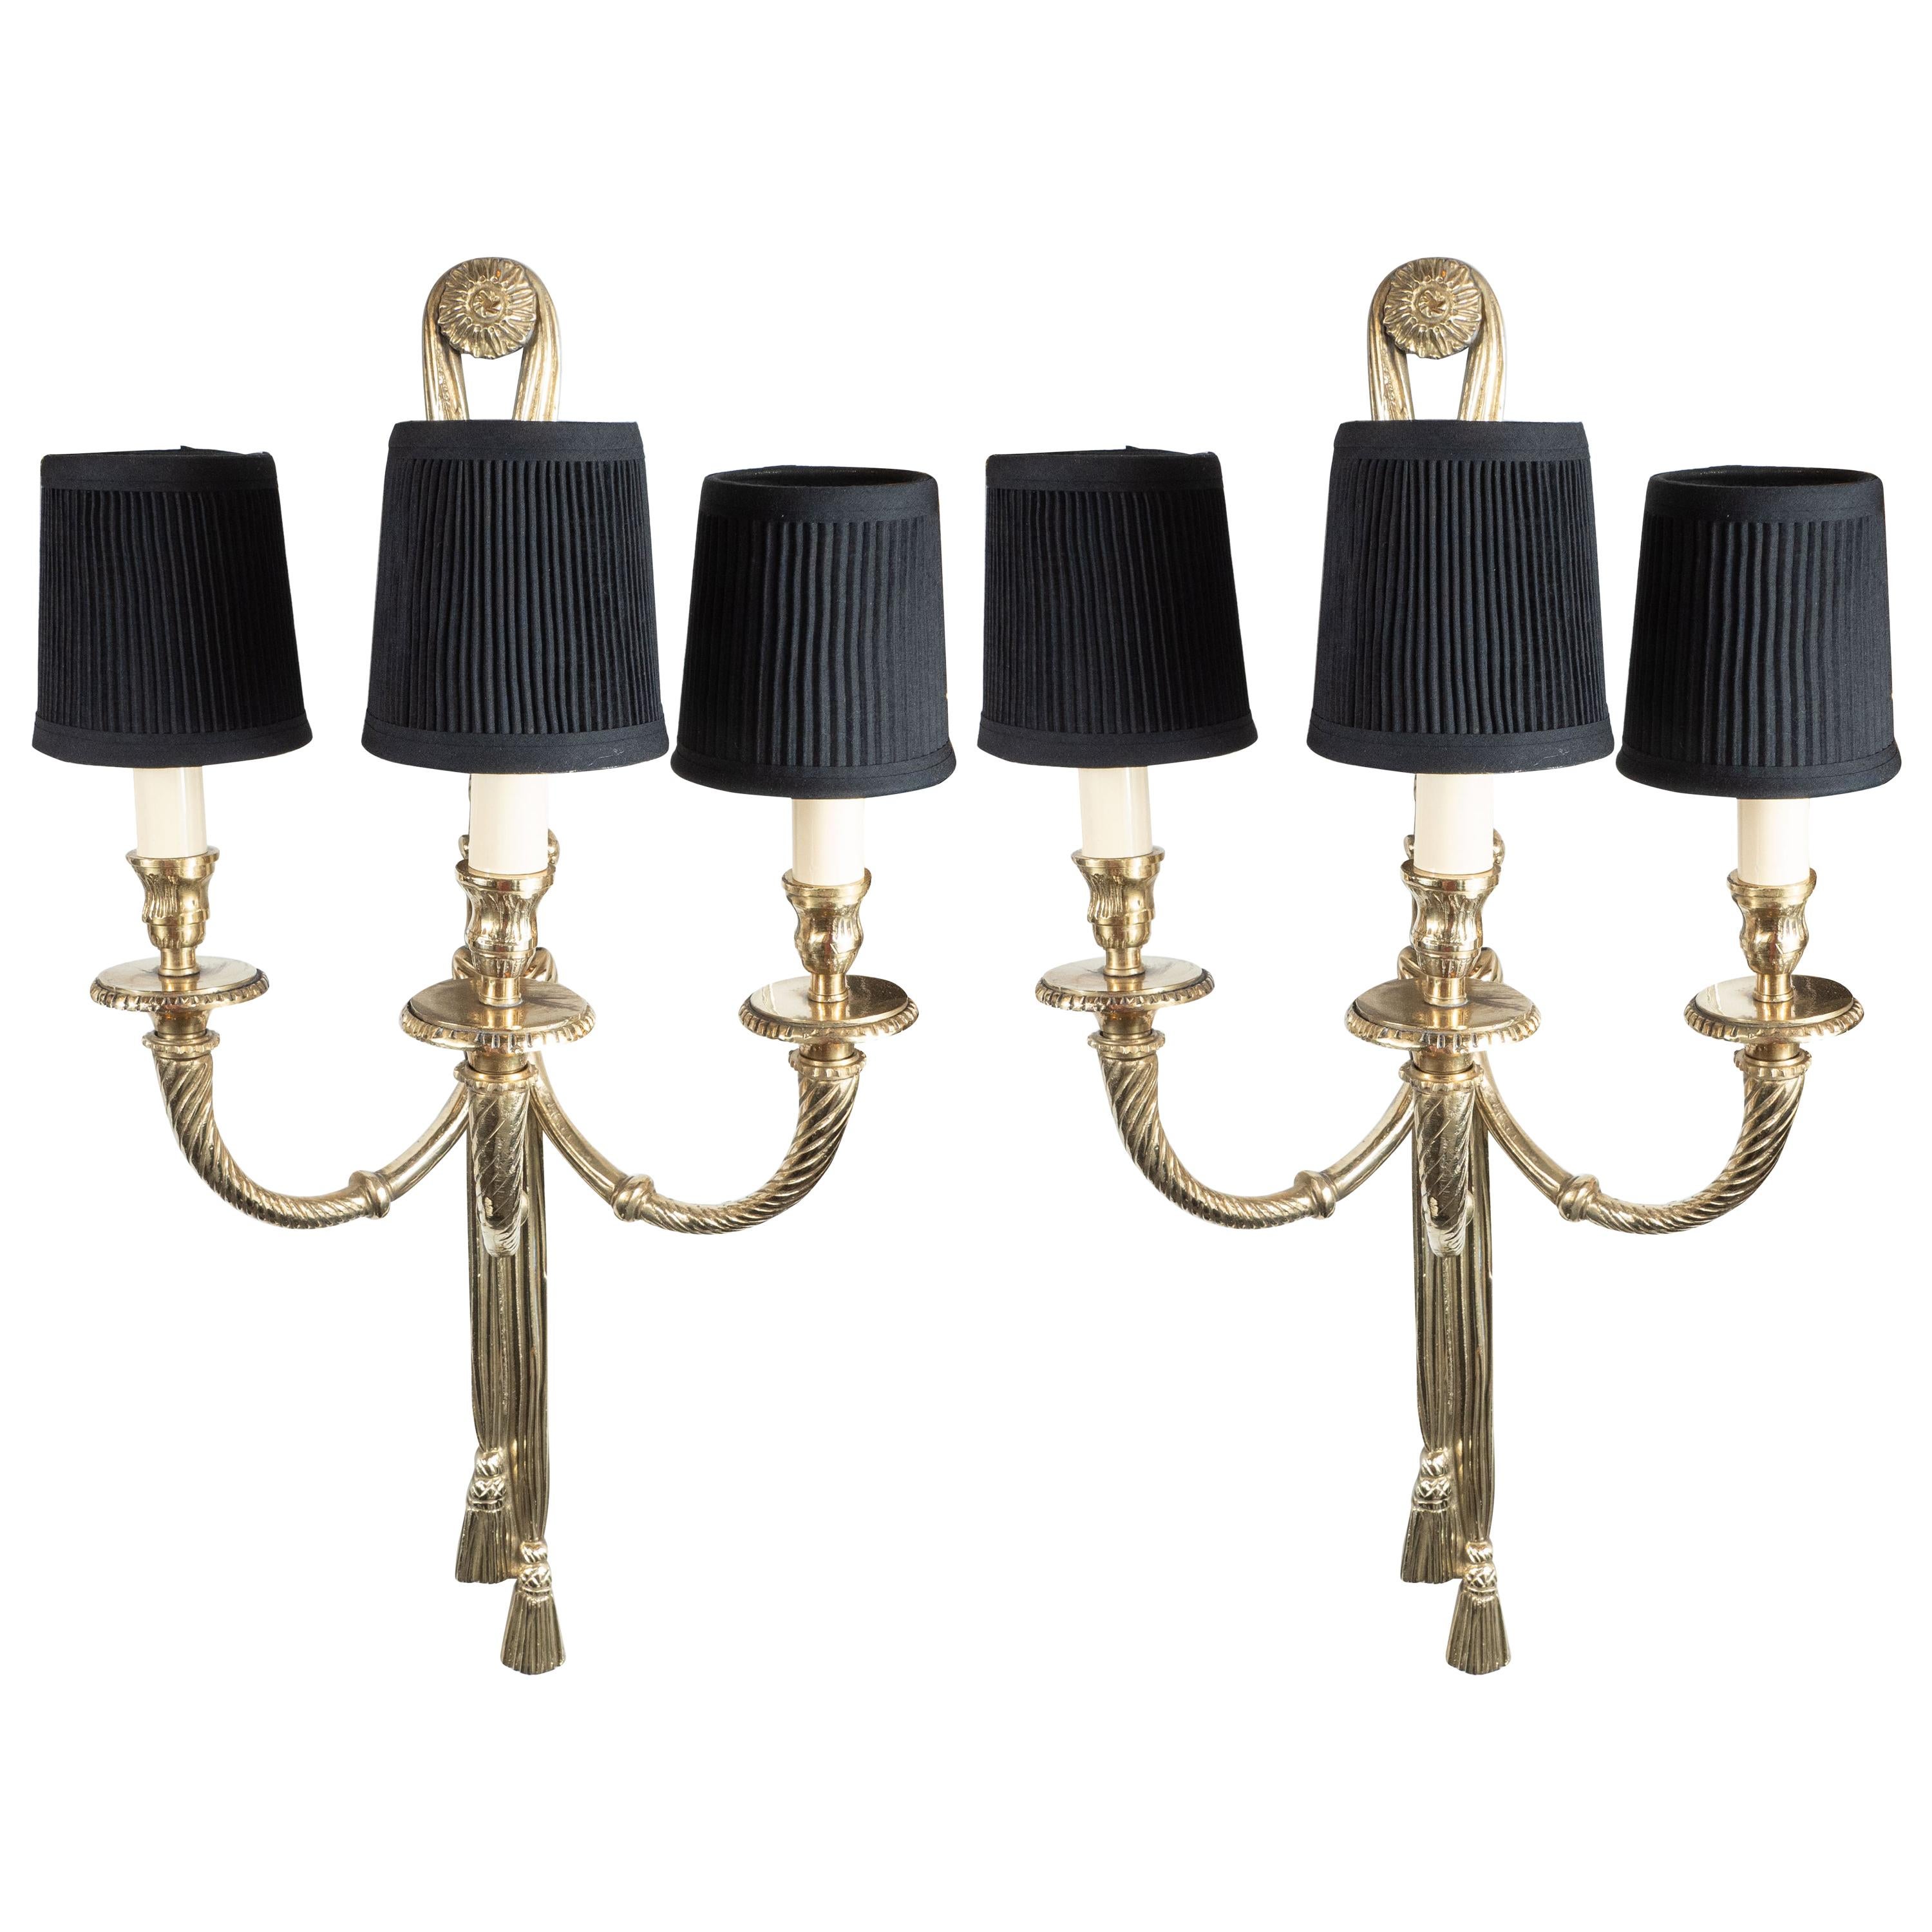 Pair of Mid-Century Modern Silvered Bronze Sconces with Neoclassical Detailing For Sale